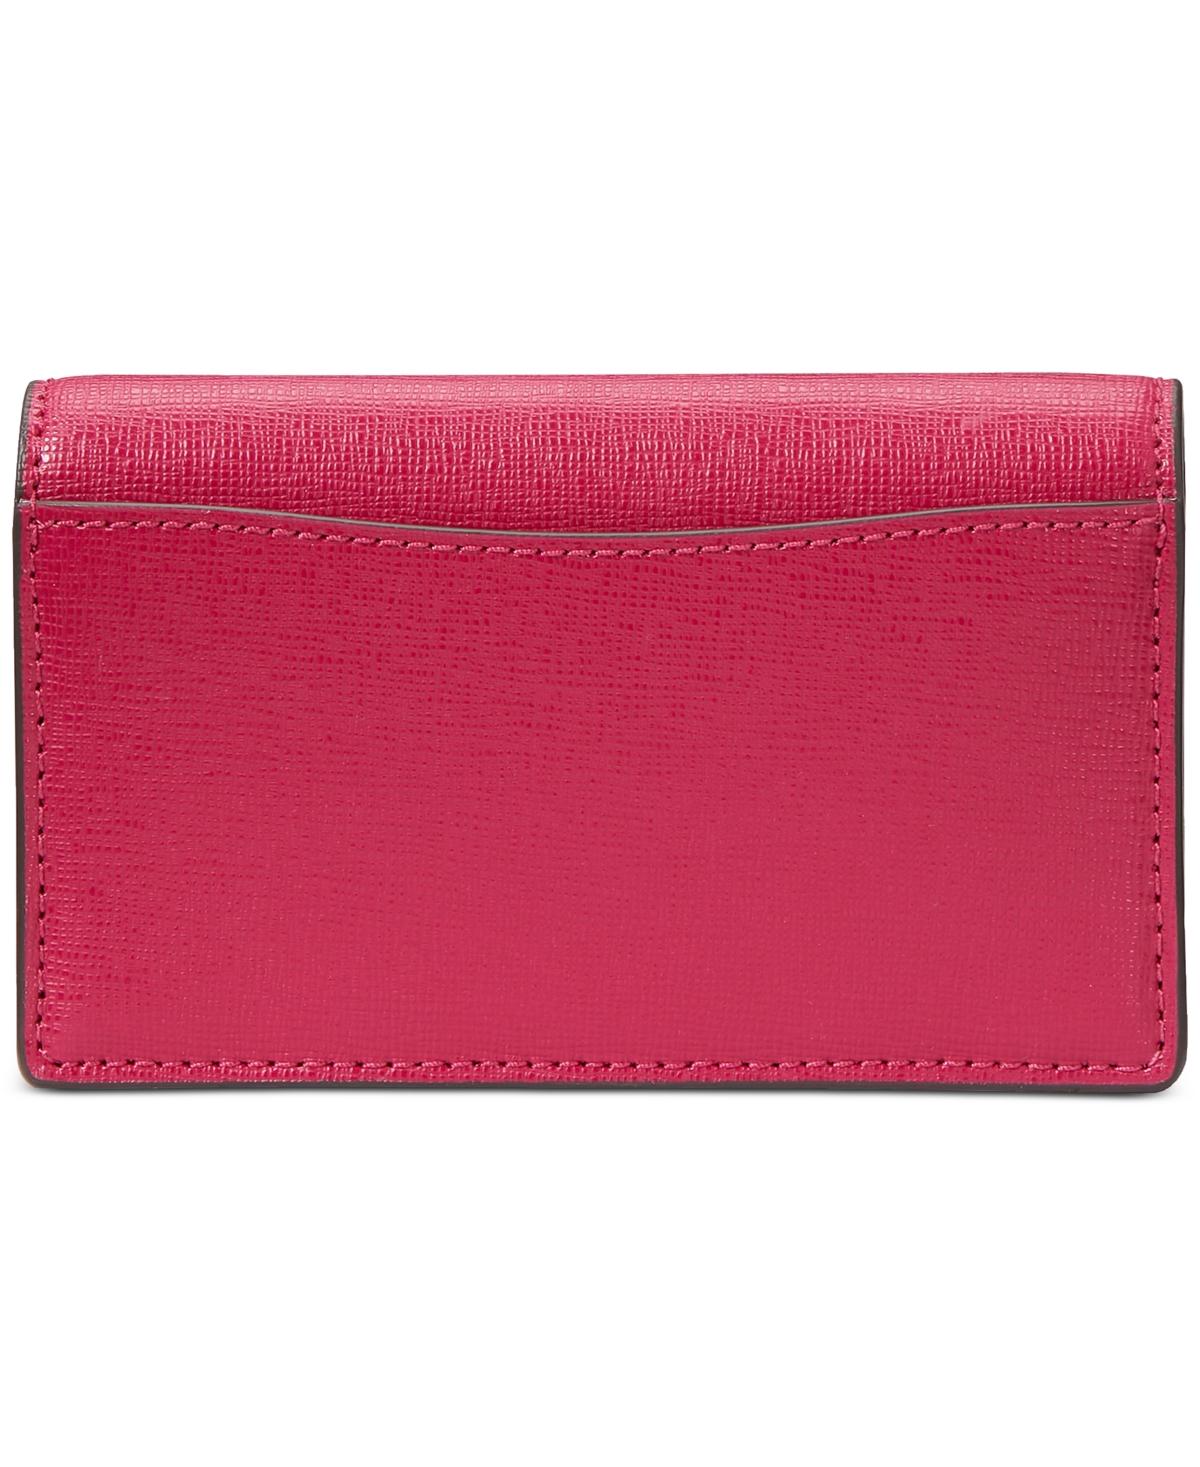 Kate Spade Pitter Patter Smooth Leather Bifold Snap Wallet in Red